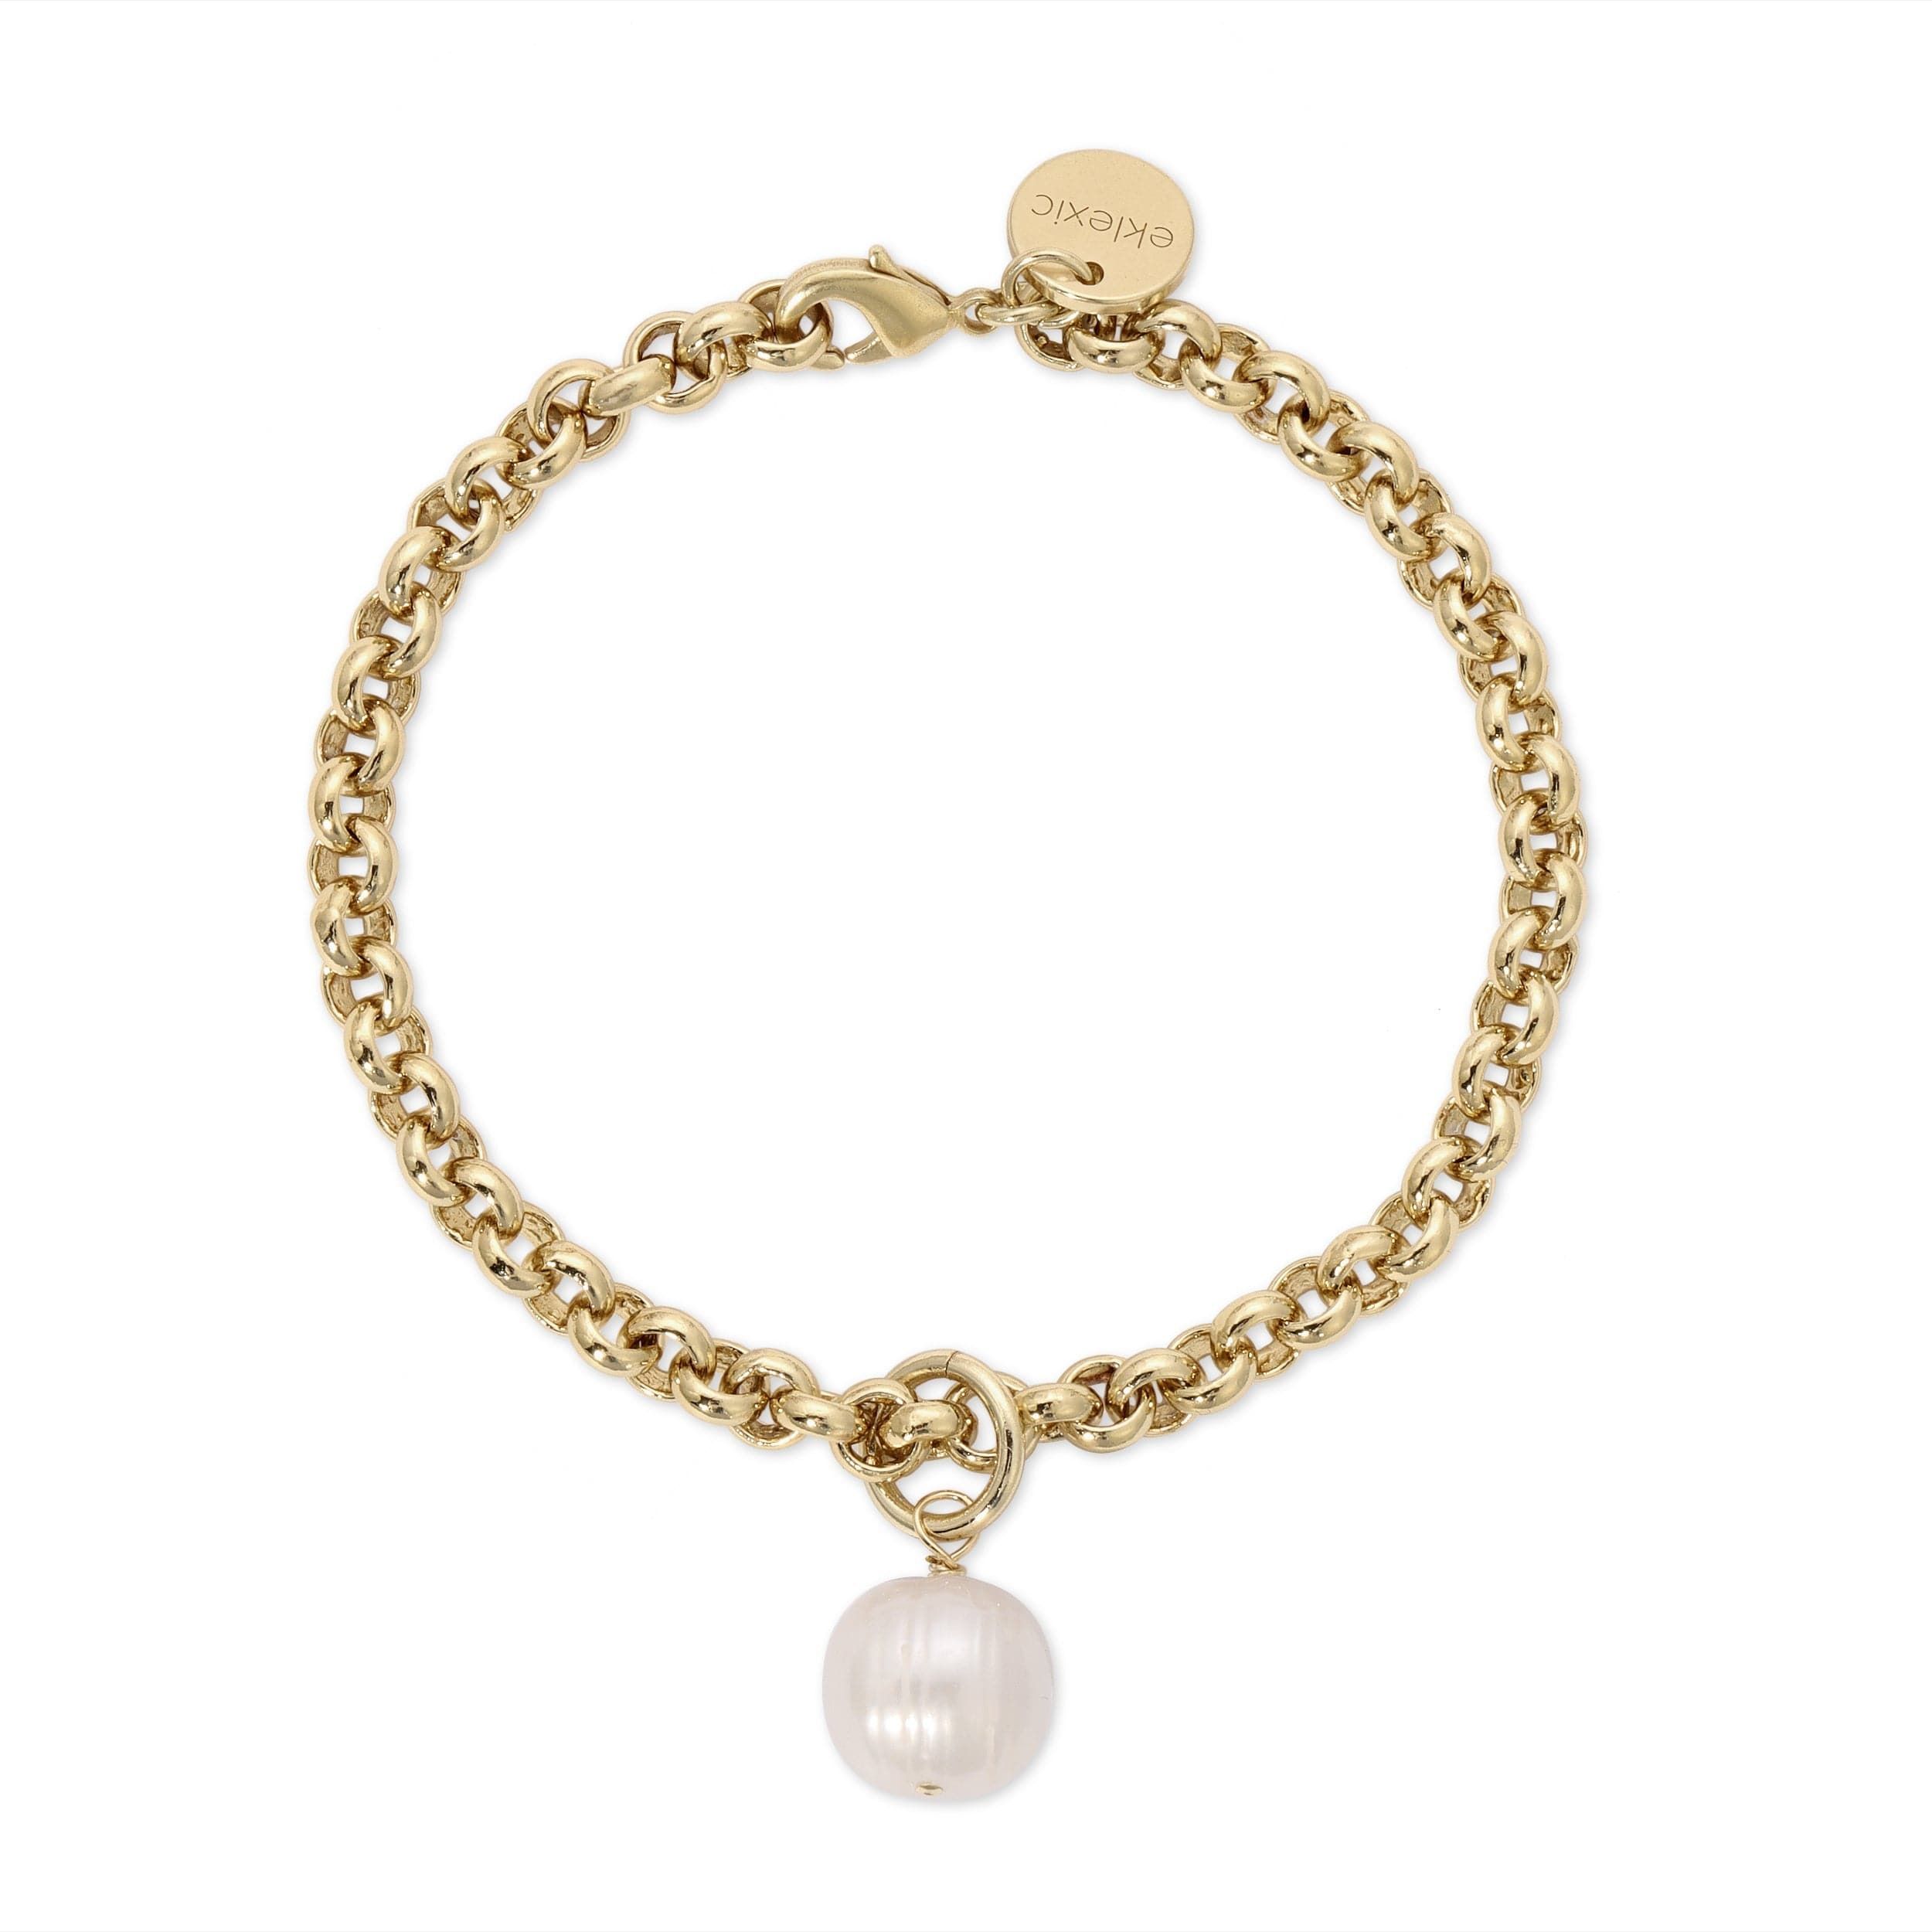 a gold bracelet with a pearl charm